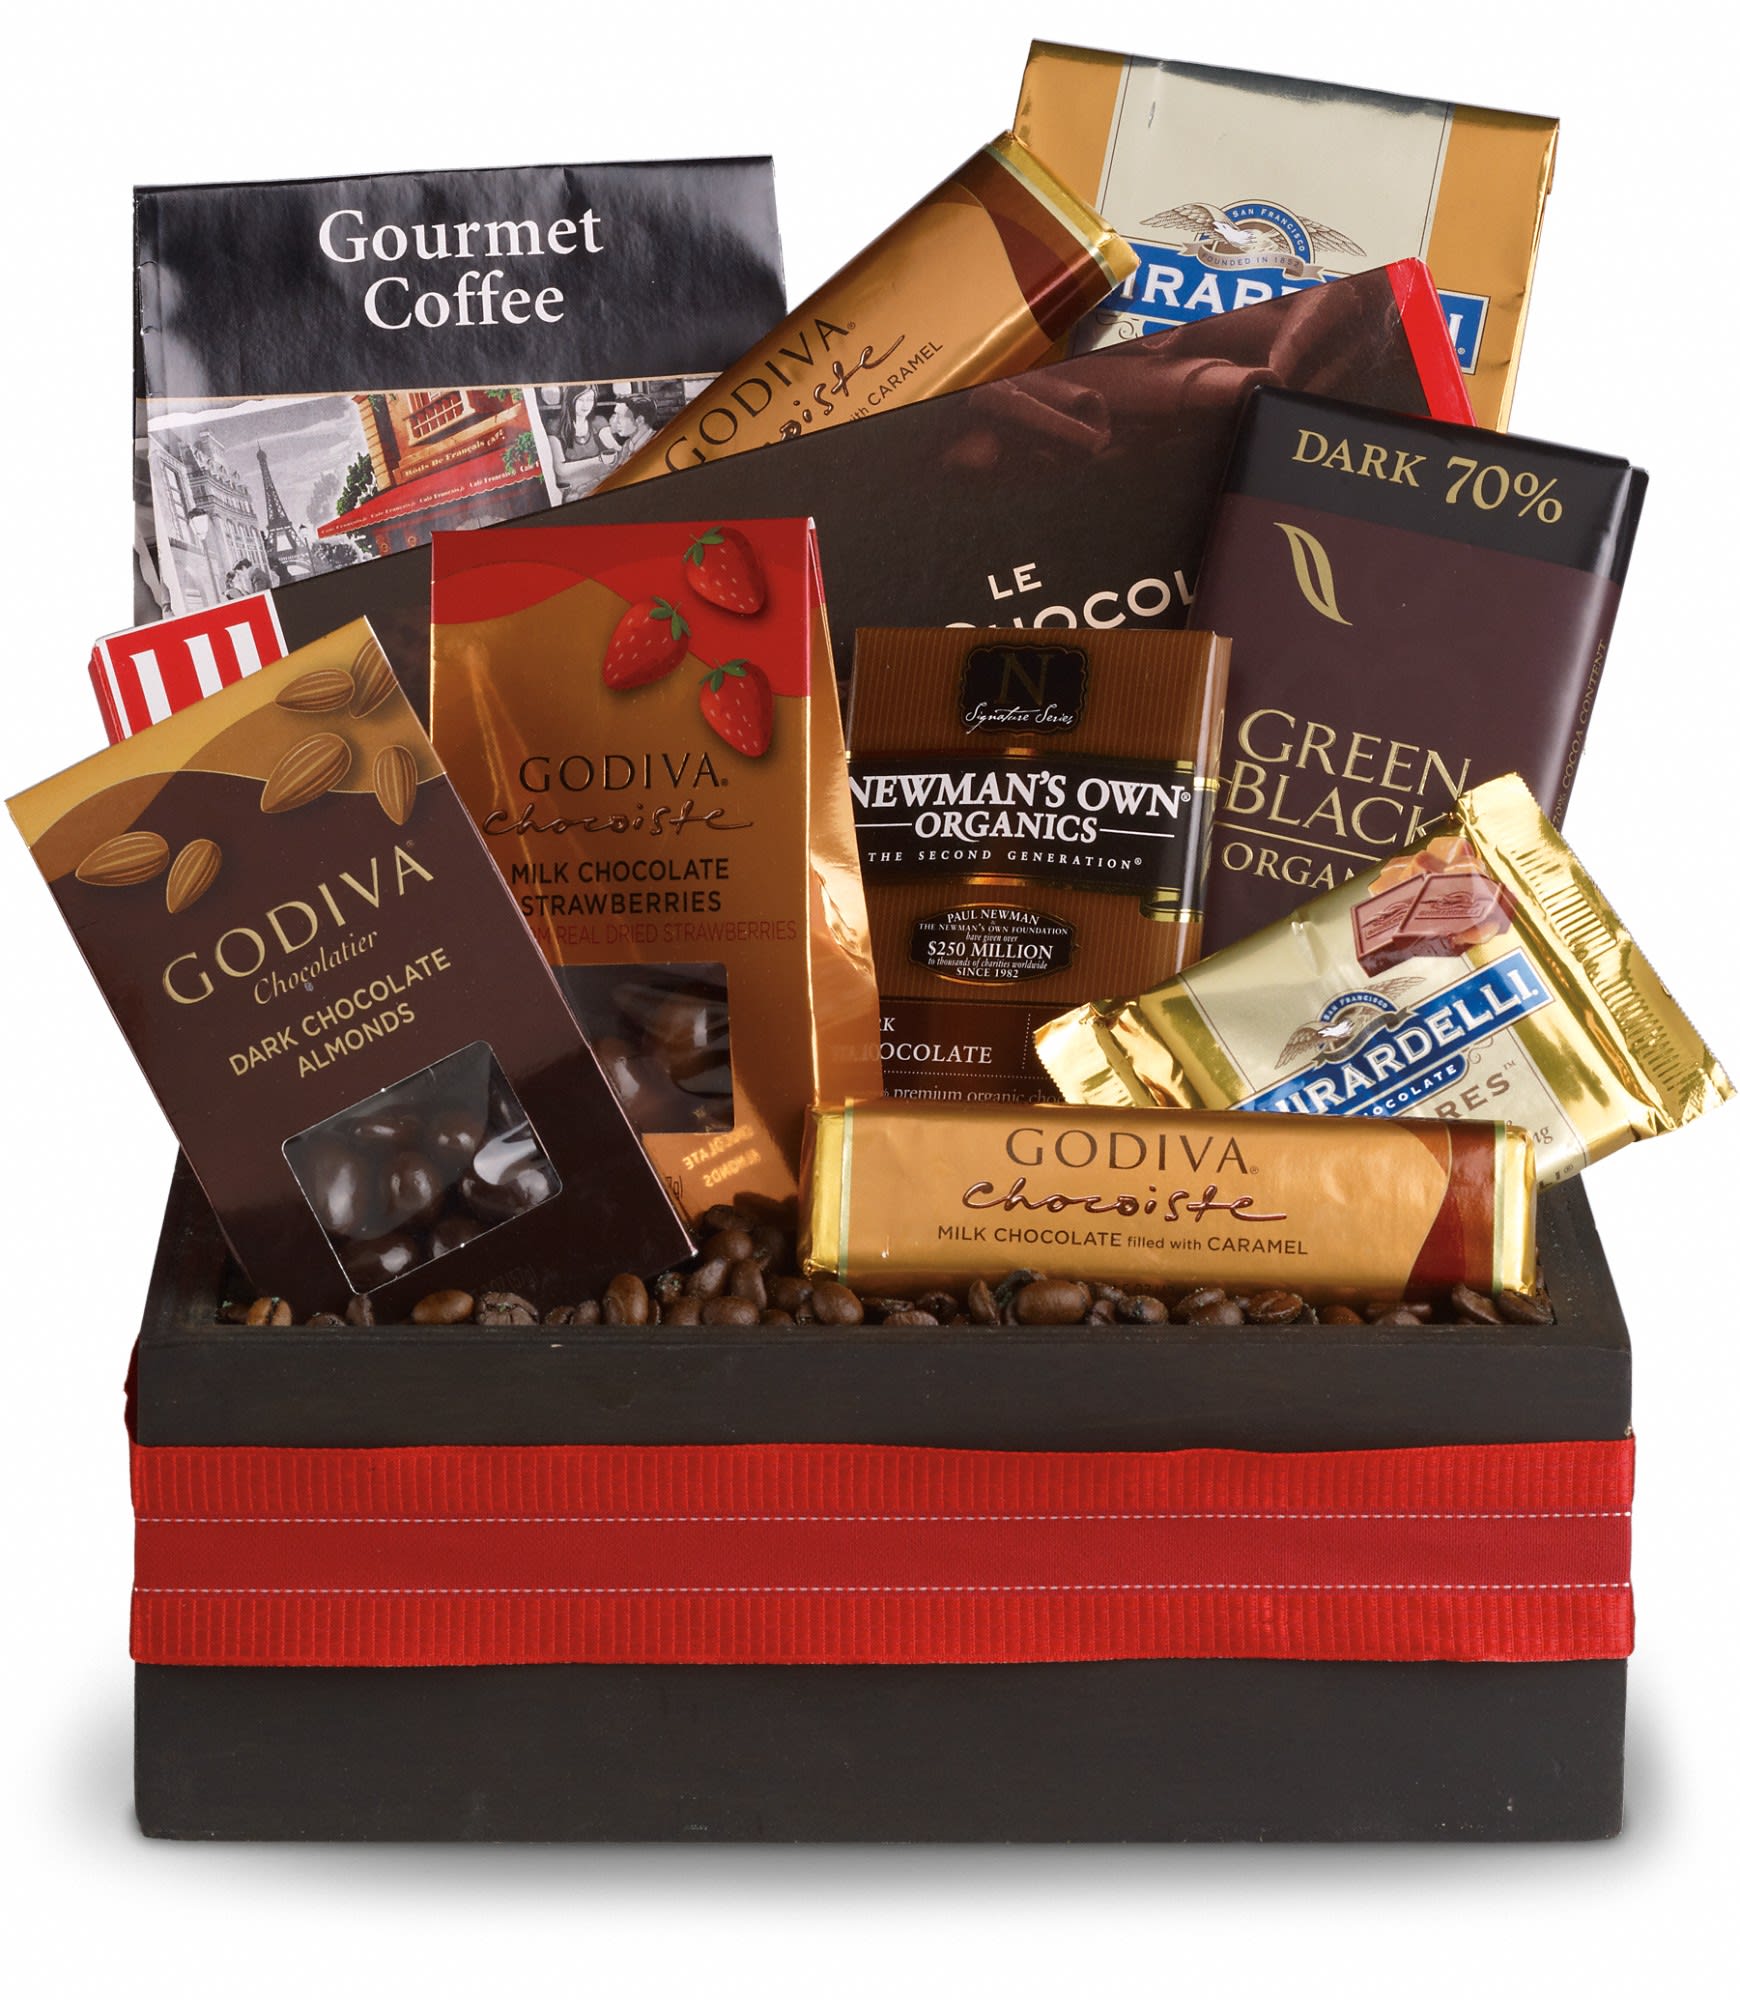 Luxurious Indulgence - If we had to sum up this luxurious basket in one word, there's no question the word is WOW! Every kind of luxurious chocolate, including chocolate-covered strawberries and chocolate covered almonds. Of course no adult indulgence would be complete without some gourmet coffee to go along with it, so we've included that too, just for good measure!      Gourmet chocolate bars, cookies, chocolate-covered almonds and strawberries, even more chocolate bars and bags, plus gourmet coffee are deliciously placed inside a ribbon-wrapped wooden box. This gift really raises the bar on luxury indulgences! Approximately 12&quot; W x 12 1/2&quot; H  